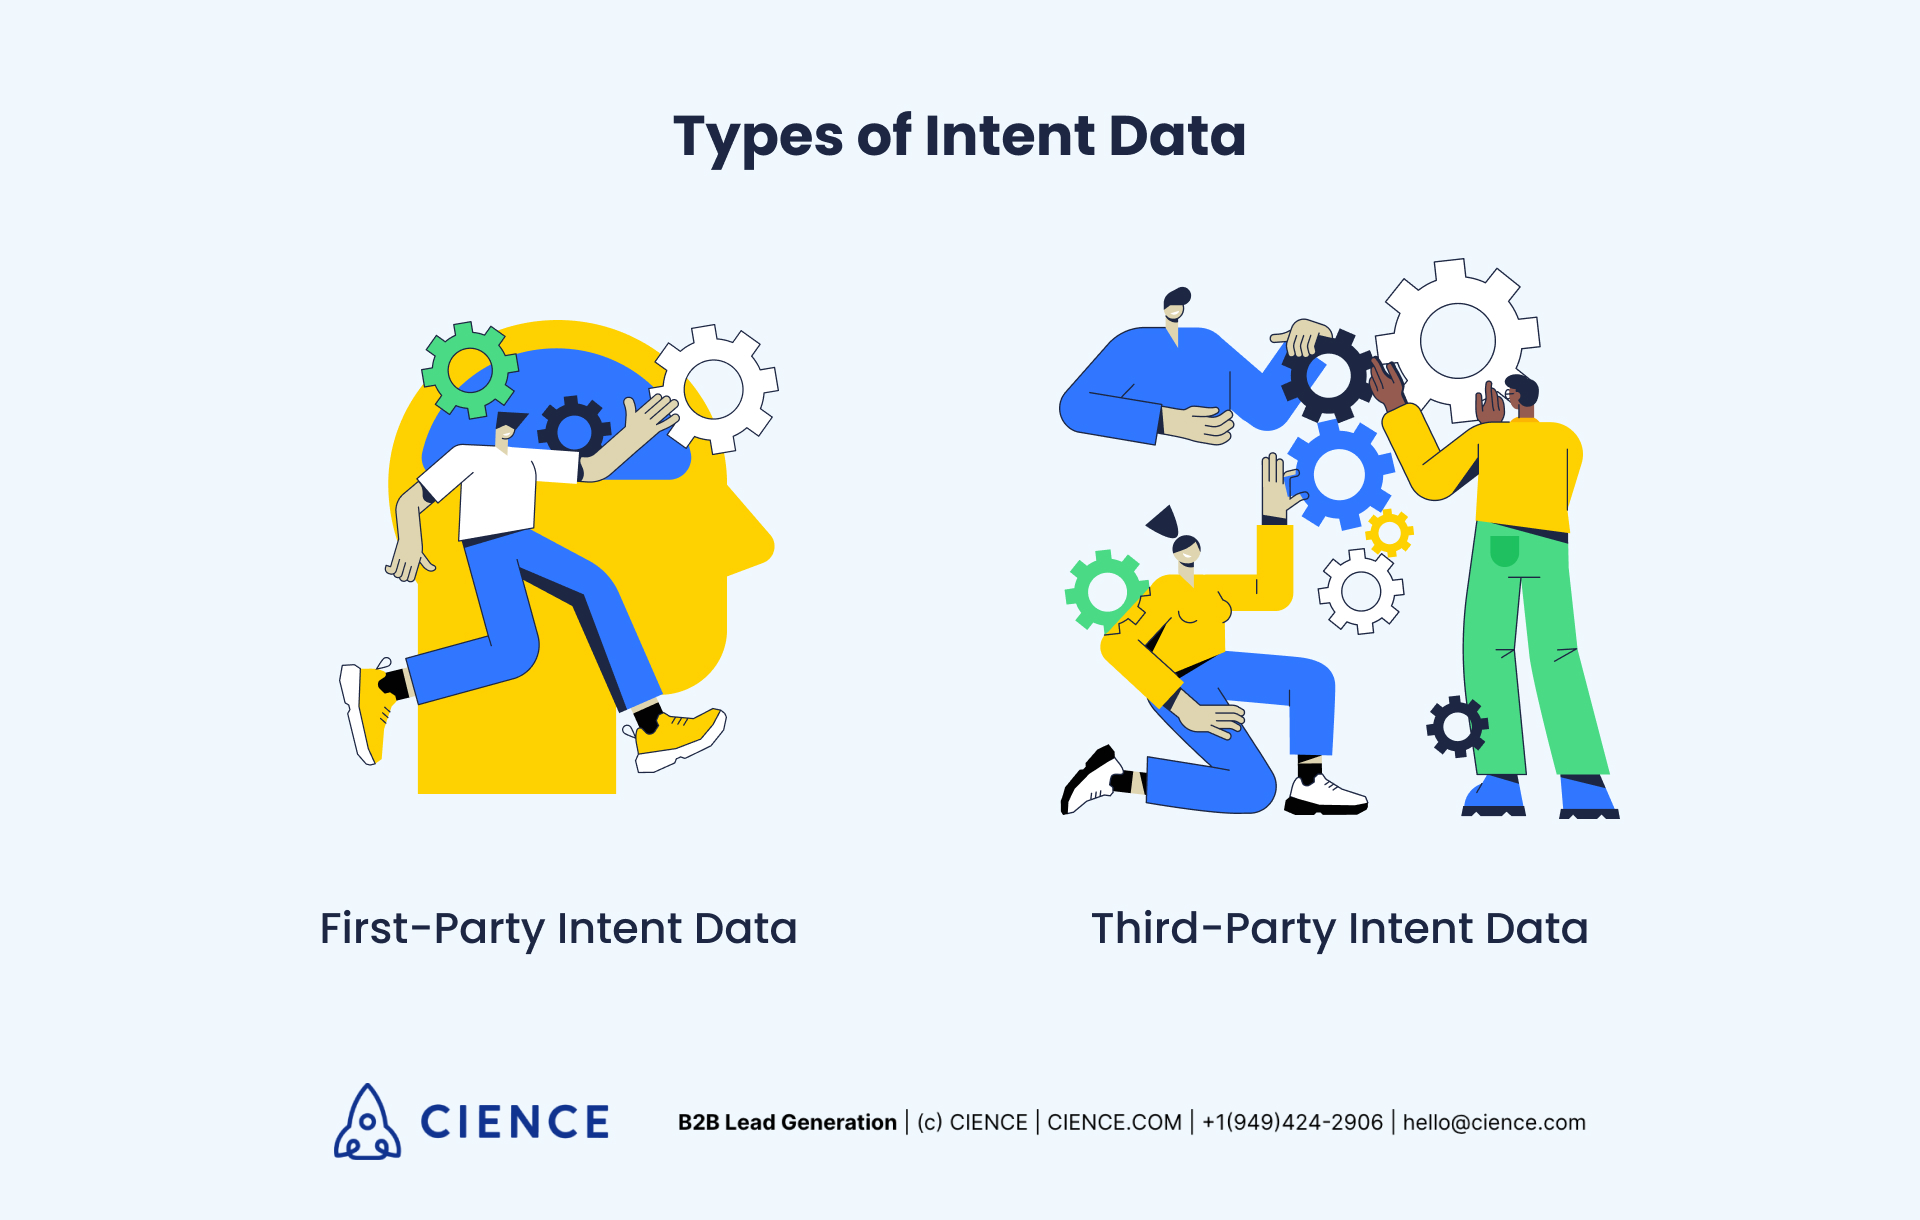 Types of intent data